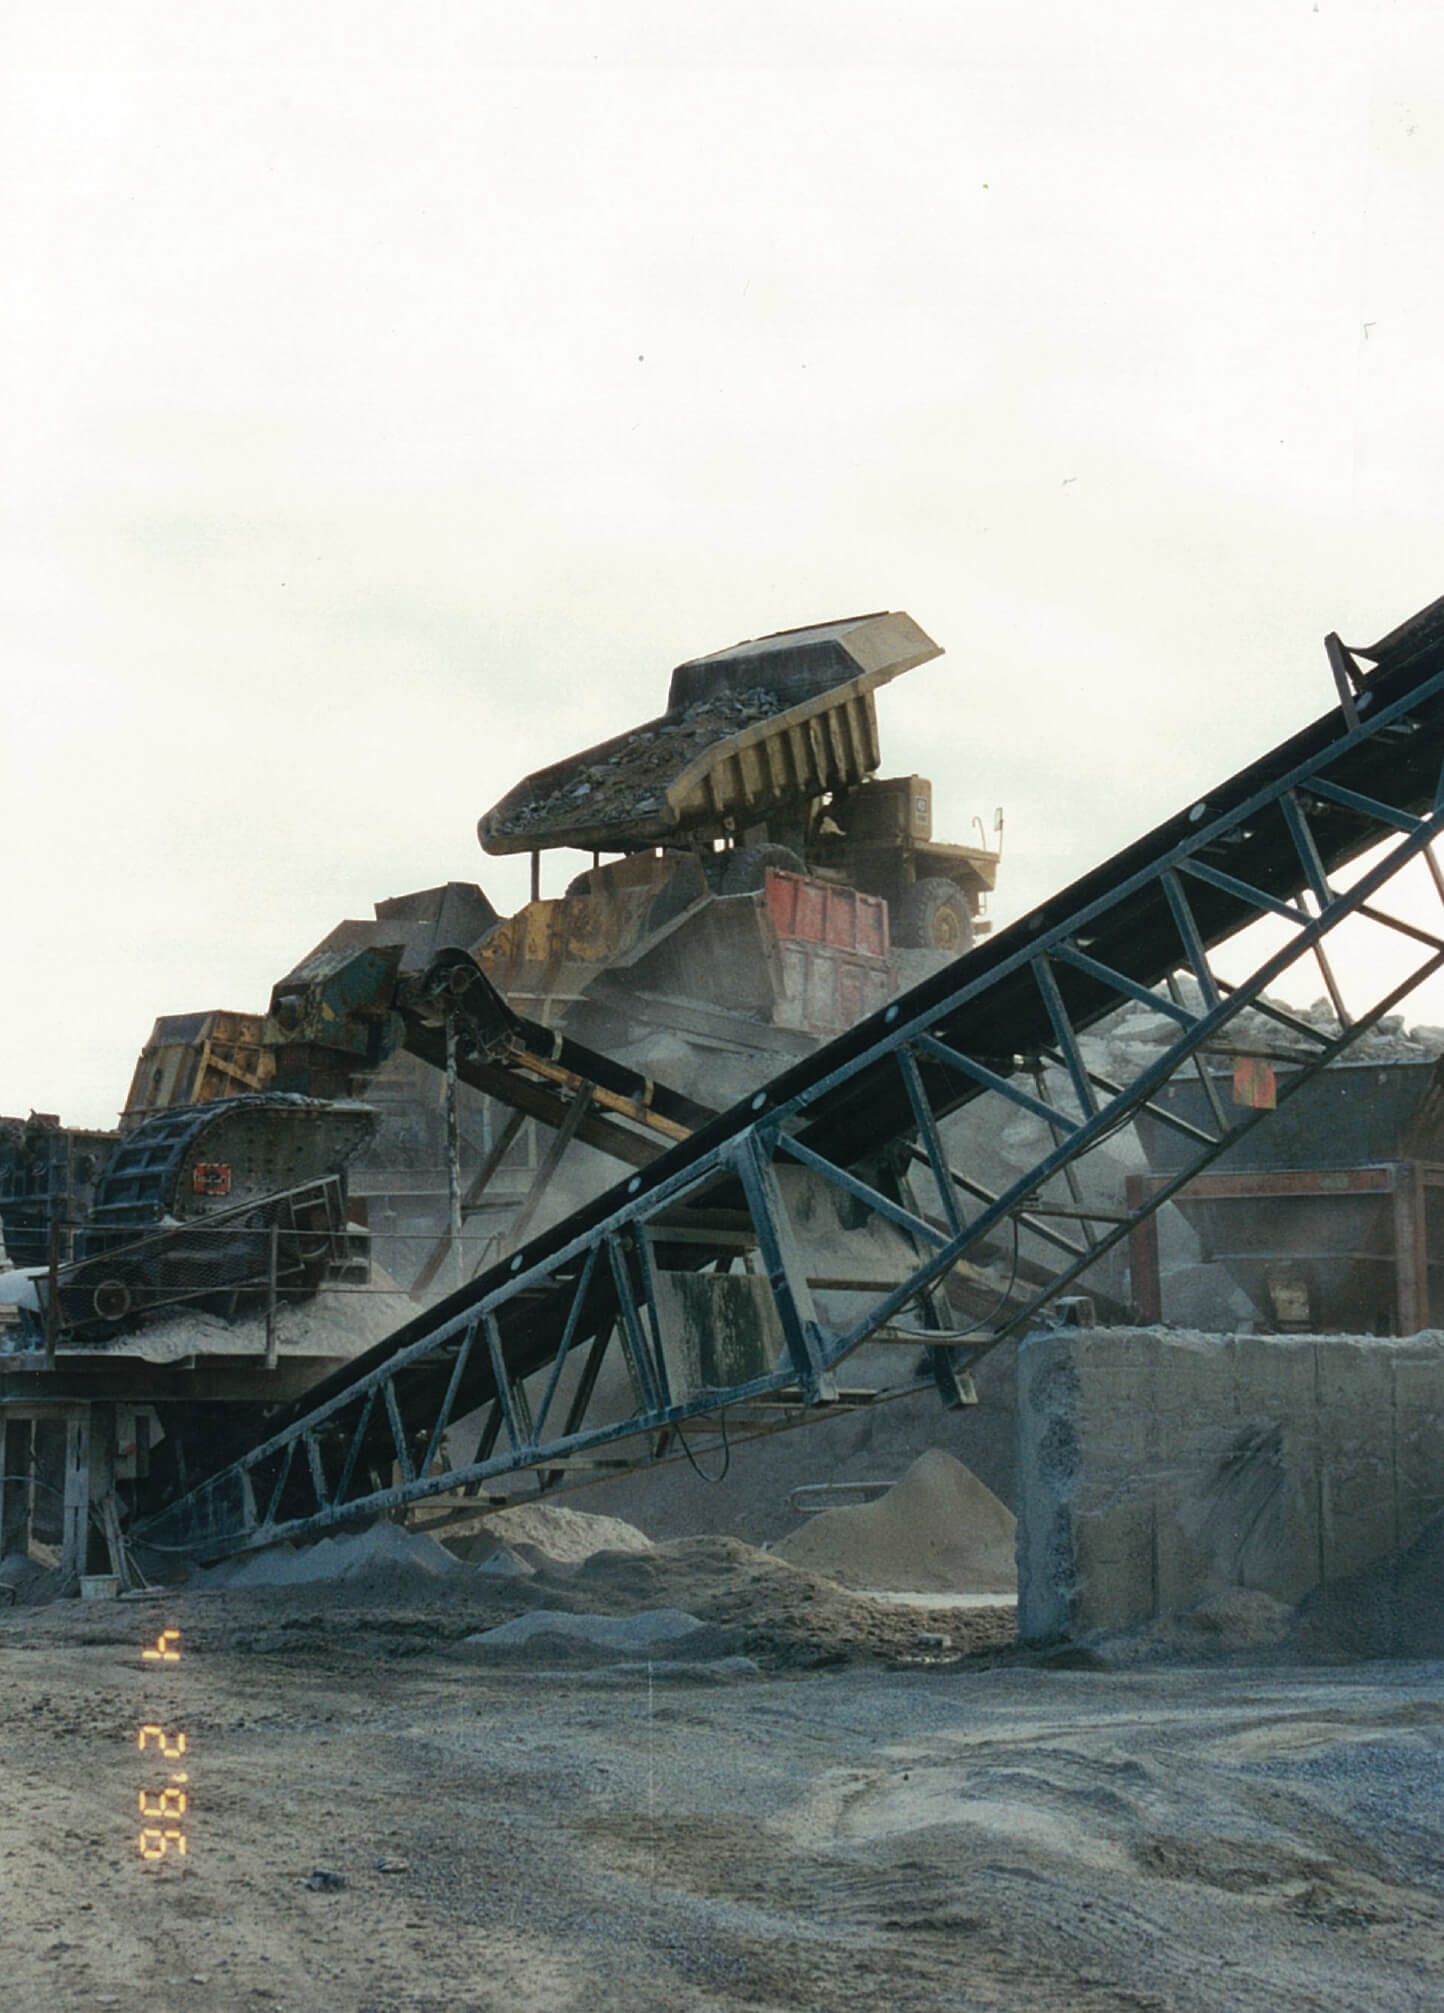 Primary Crusher with Dump Truck tipping